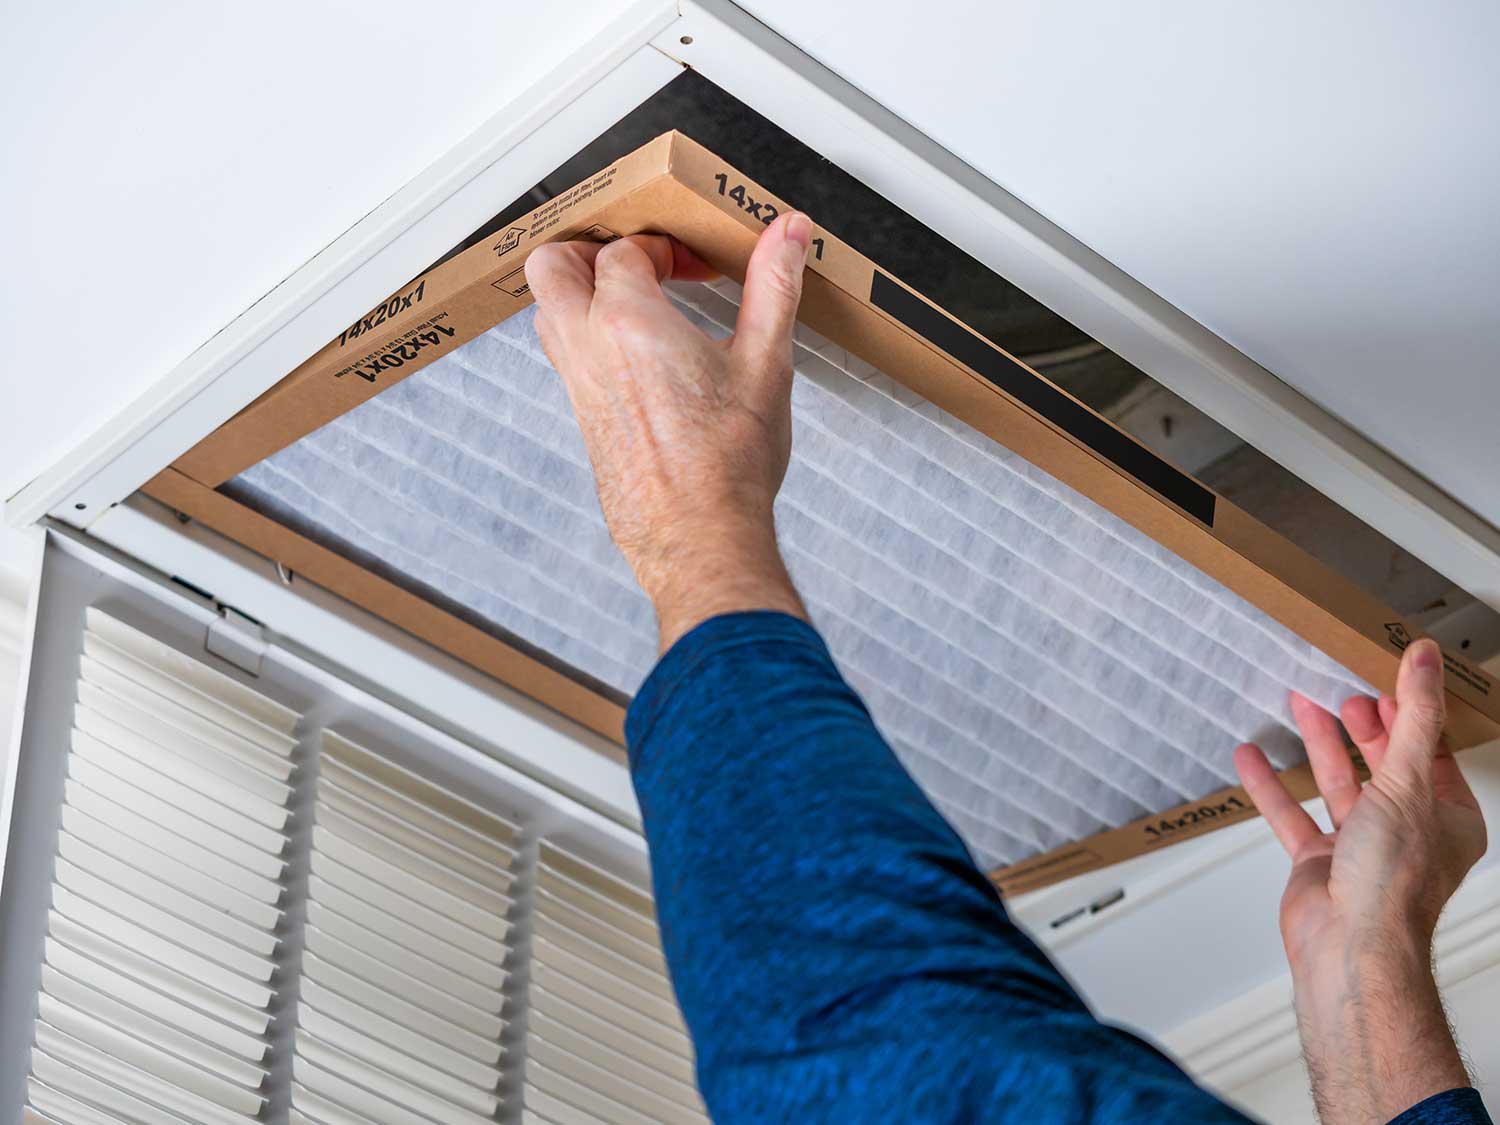 Ductless HVAC systems have numerous benefits